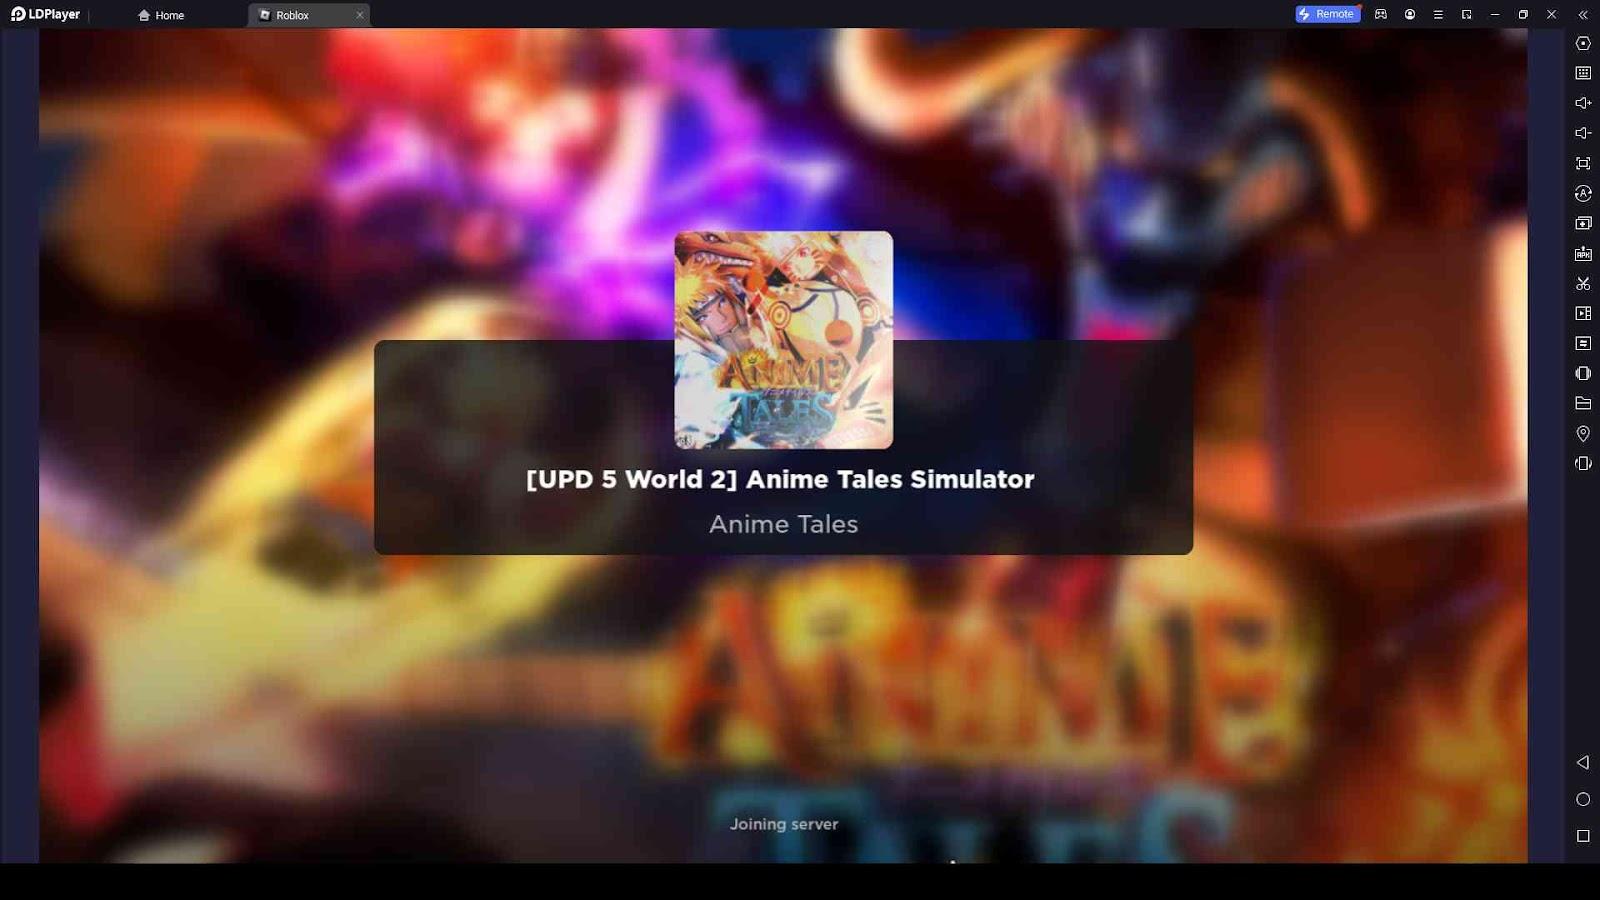 All Roblox Anime Worlds Simulator Codes in August 2023: Free